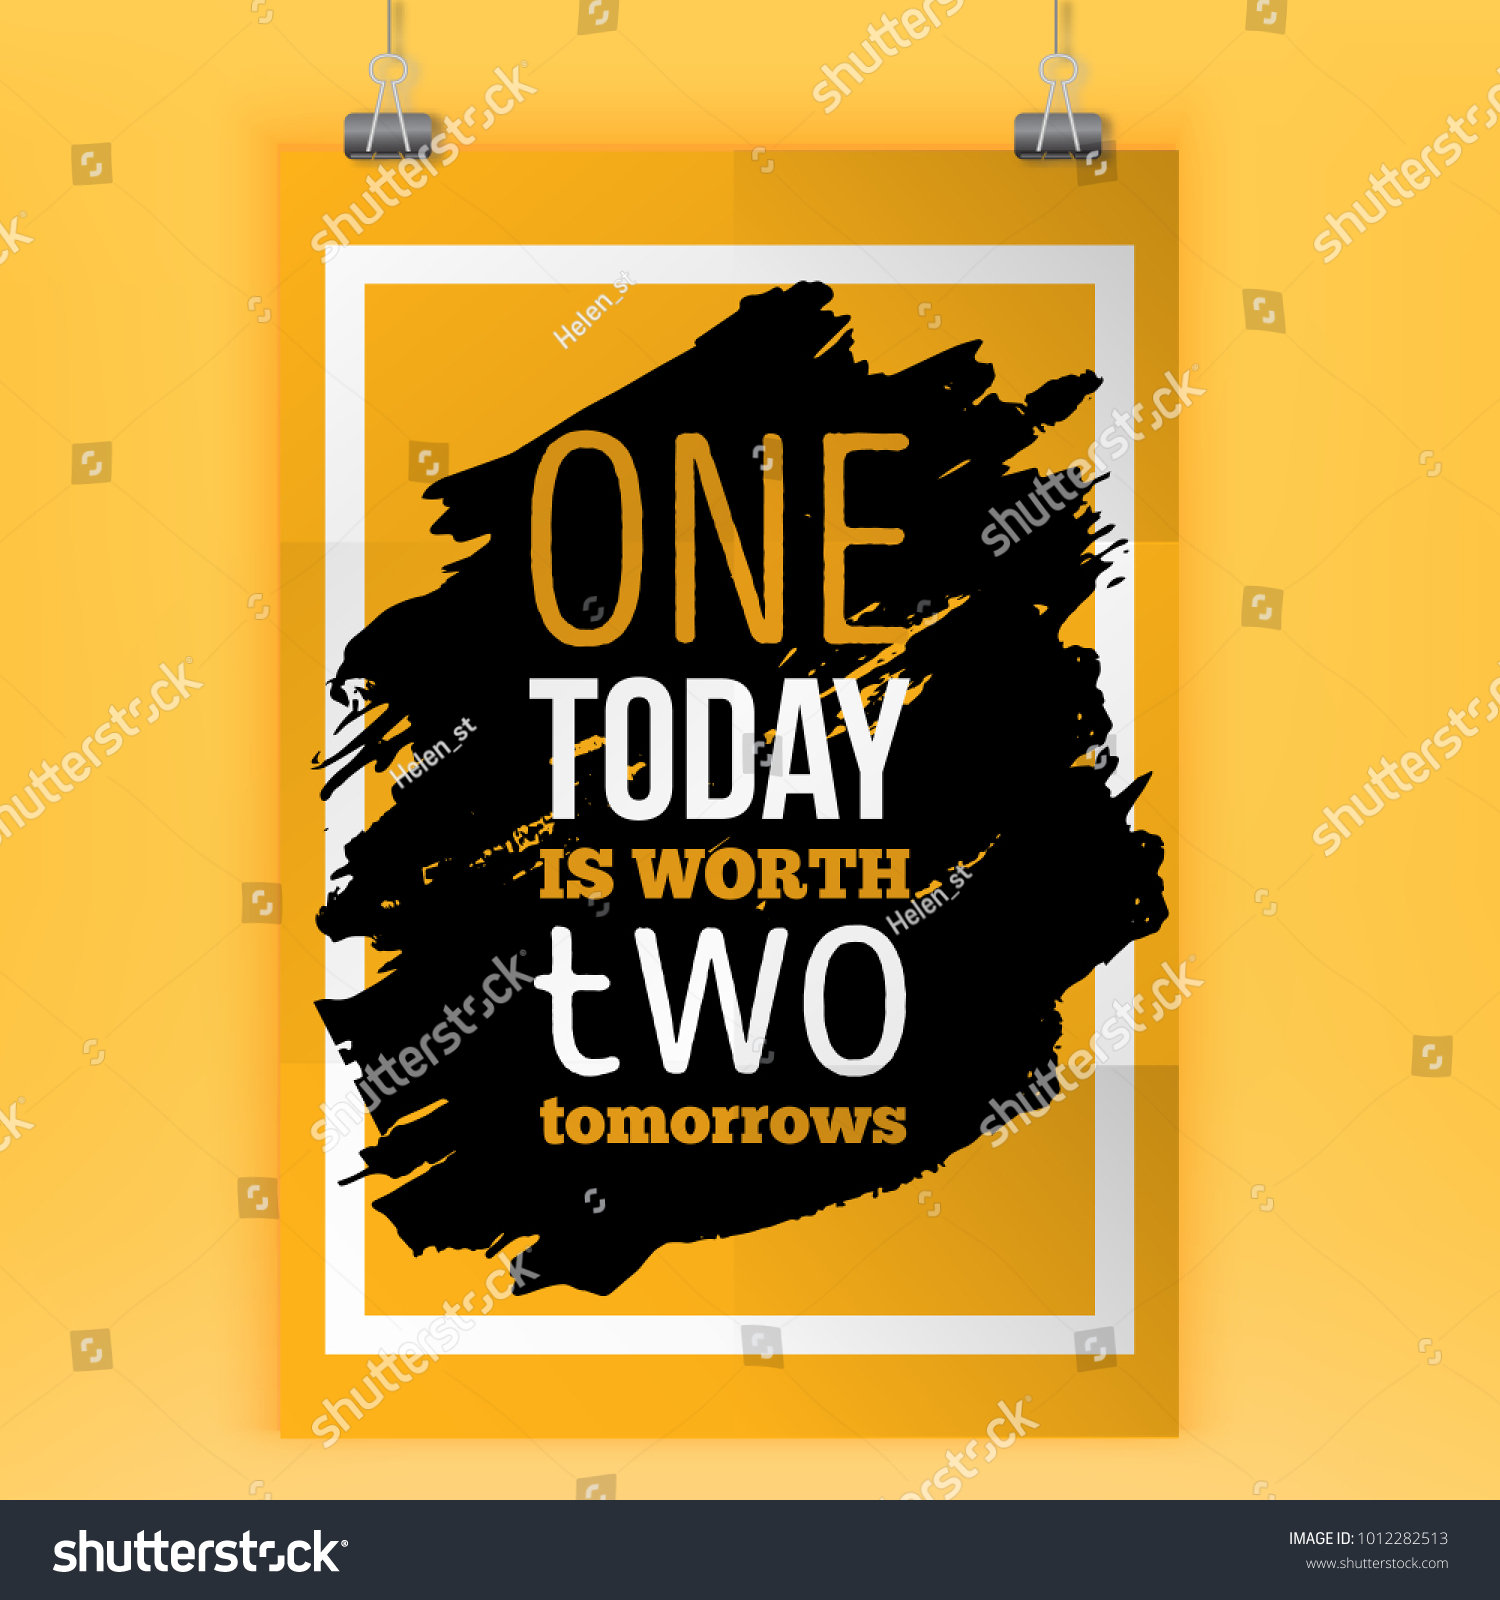 One Today Is Worth Two Tomorrows Inspirational Typography Poster With Quote Print For Wall On Black Stain With Frame